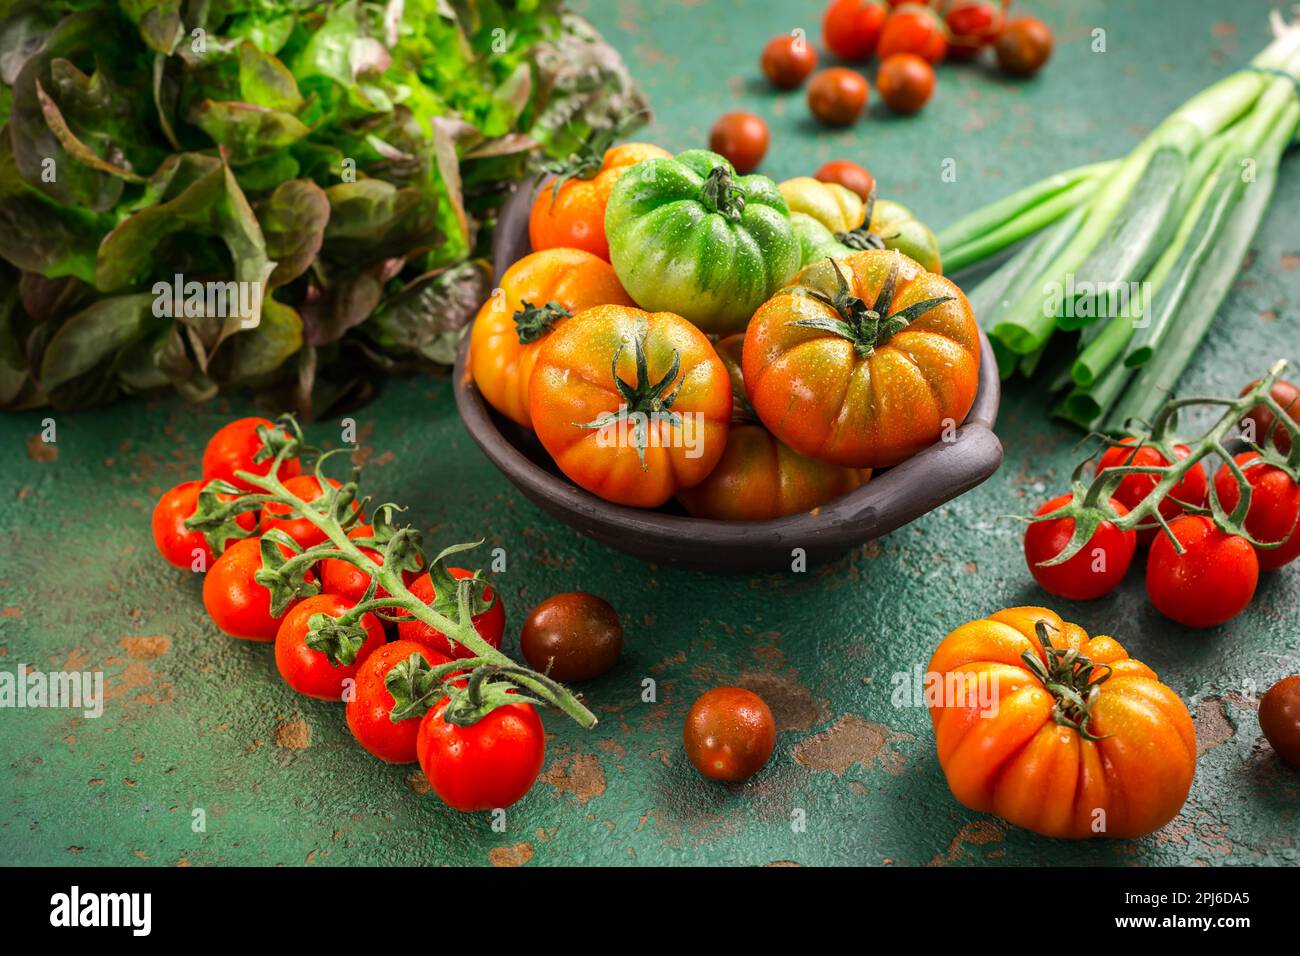 Assortment of tomatoes, lettuce and sprin onions on green background Stock Photo